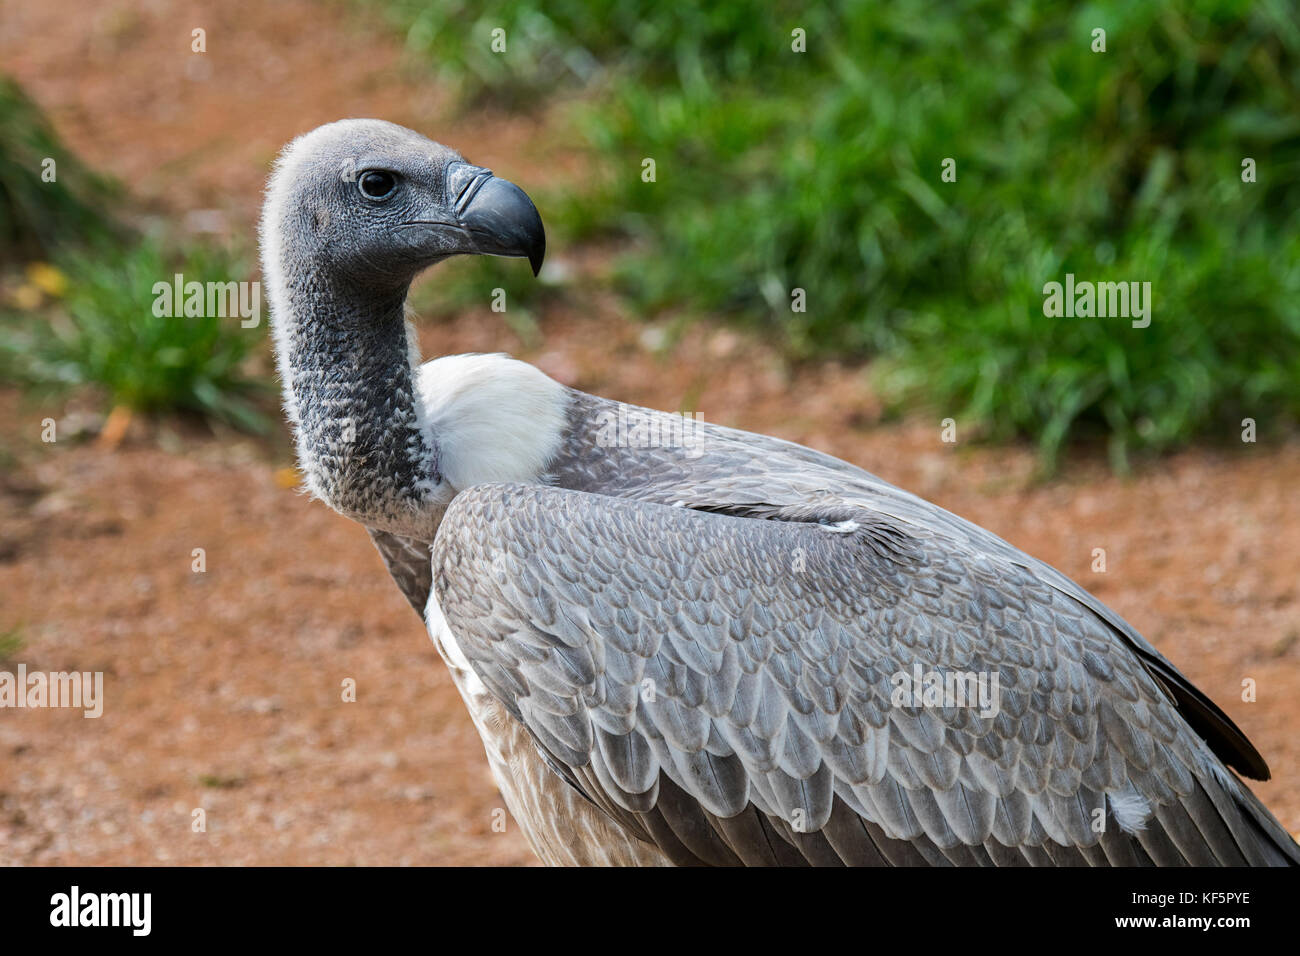 African white-backed vulture (gyps africanus) close up ritratto Foto Stock